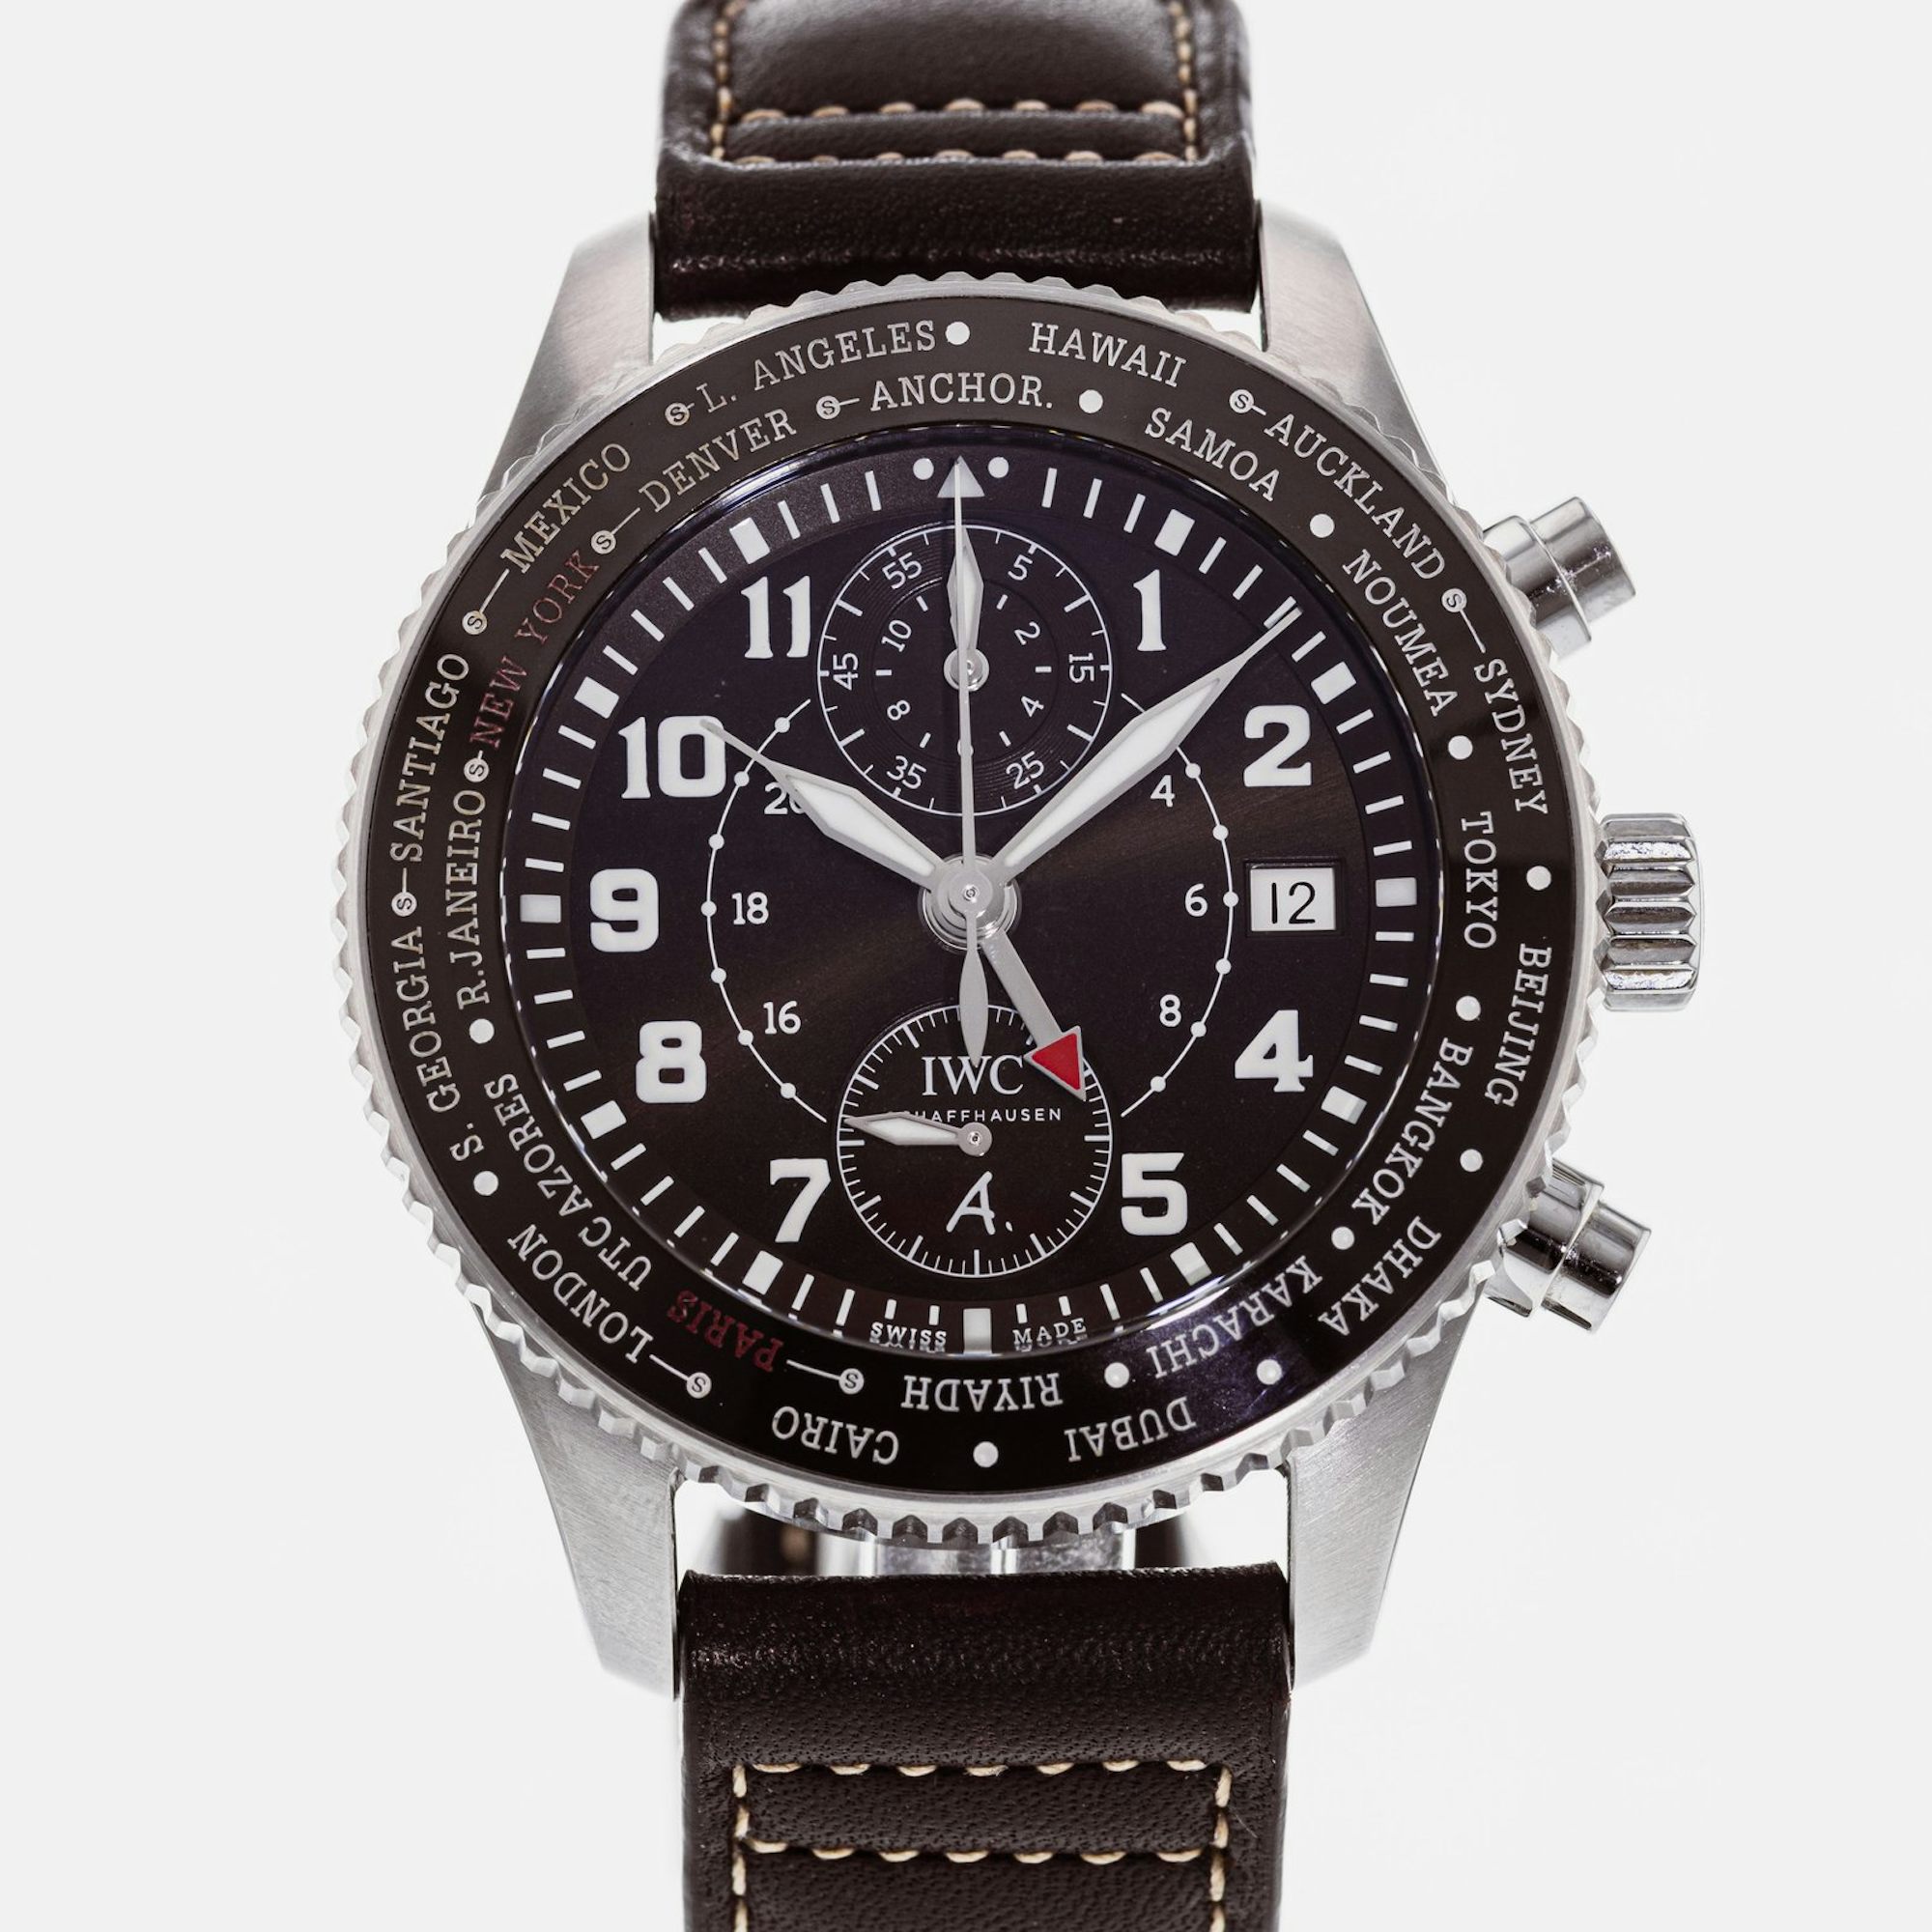 The soldier was shot by the IWC Schaffhausen Pilot Timezoner "80 Years Flight to New York" Price IW3950-03